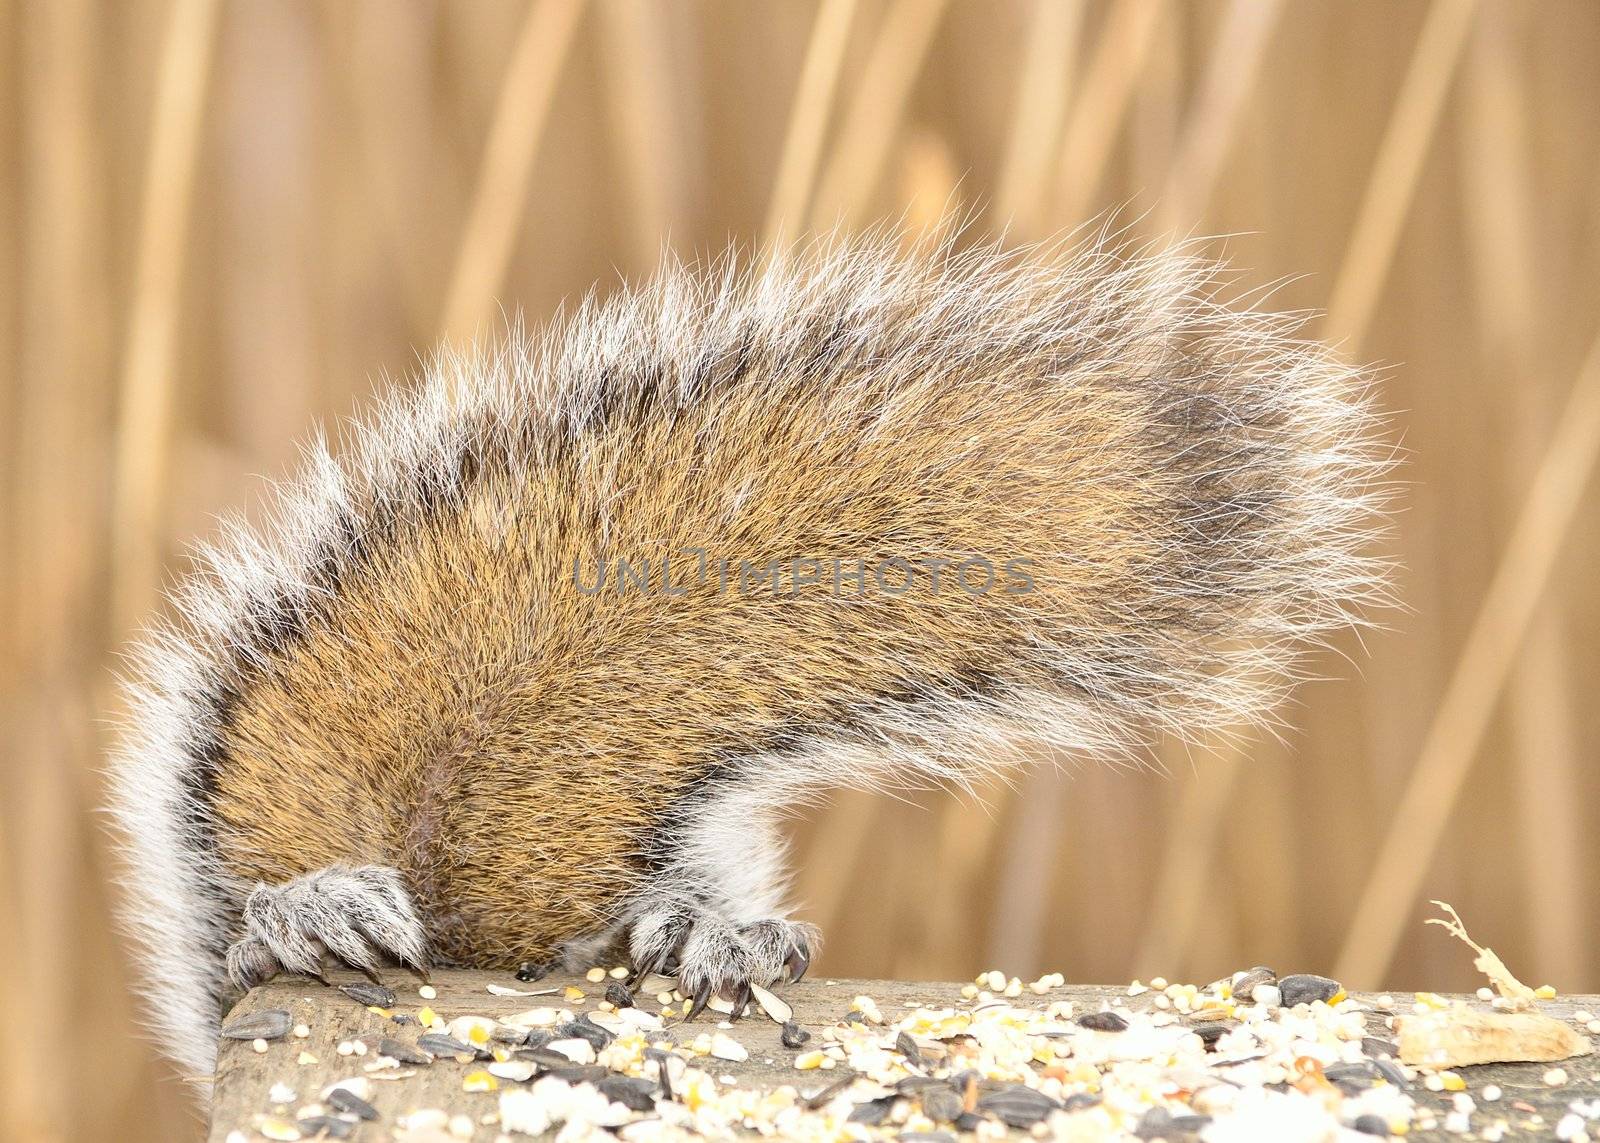 A Gray Squirrel tail as he climbs back off a wooden post.